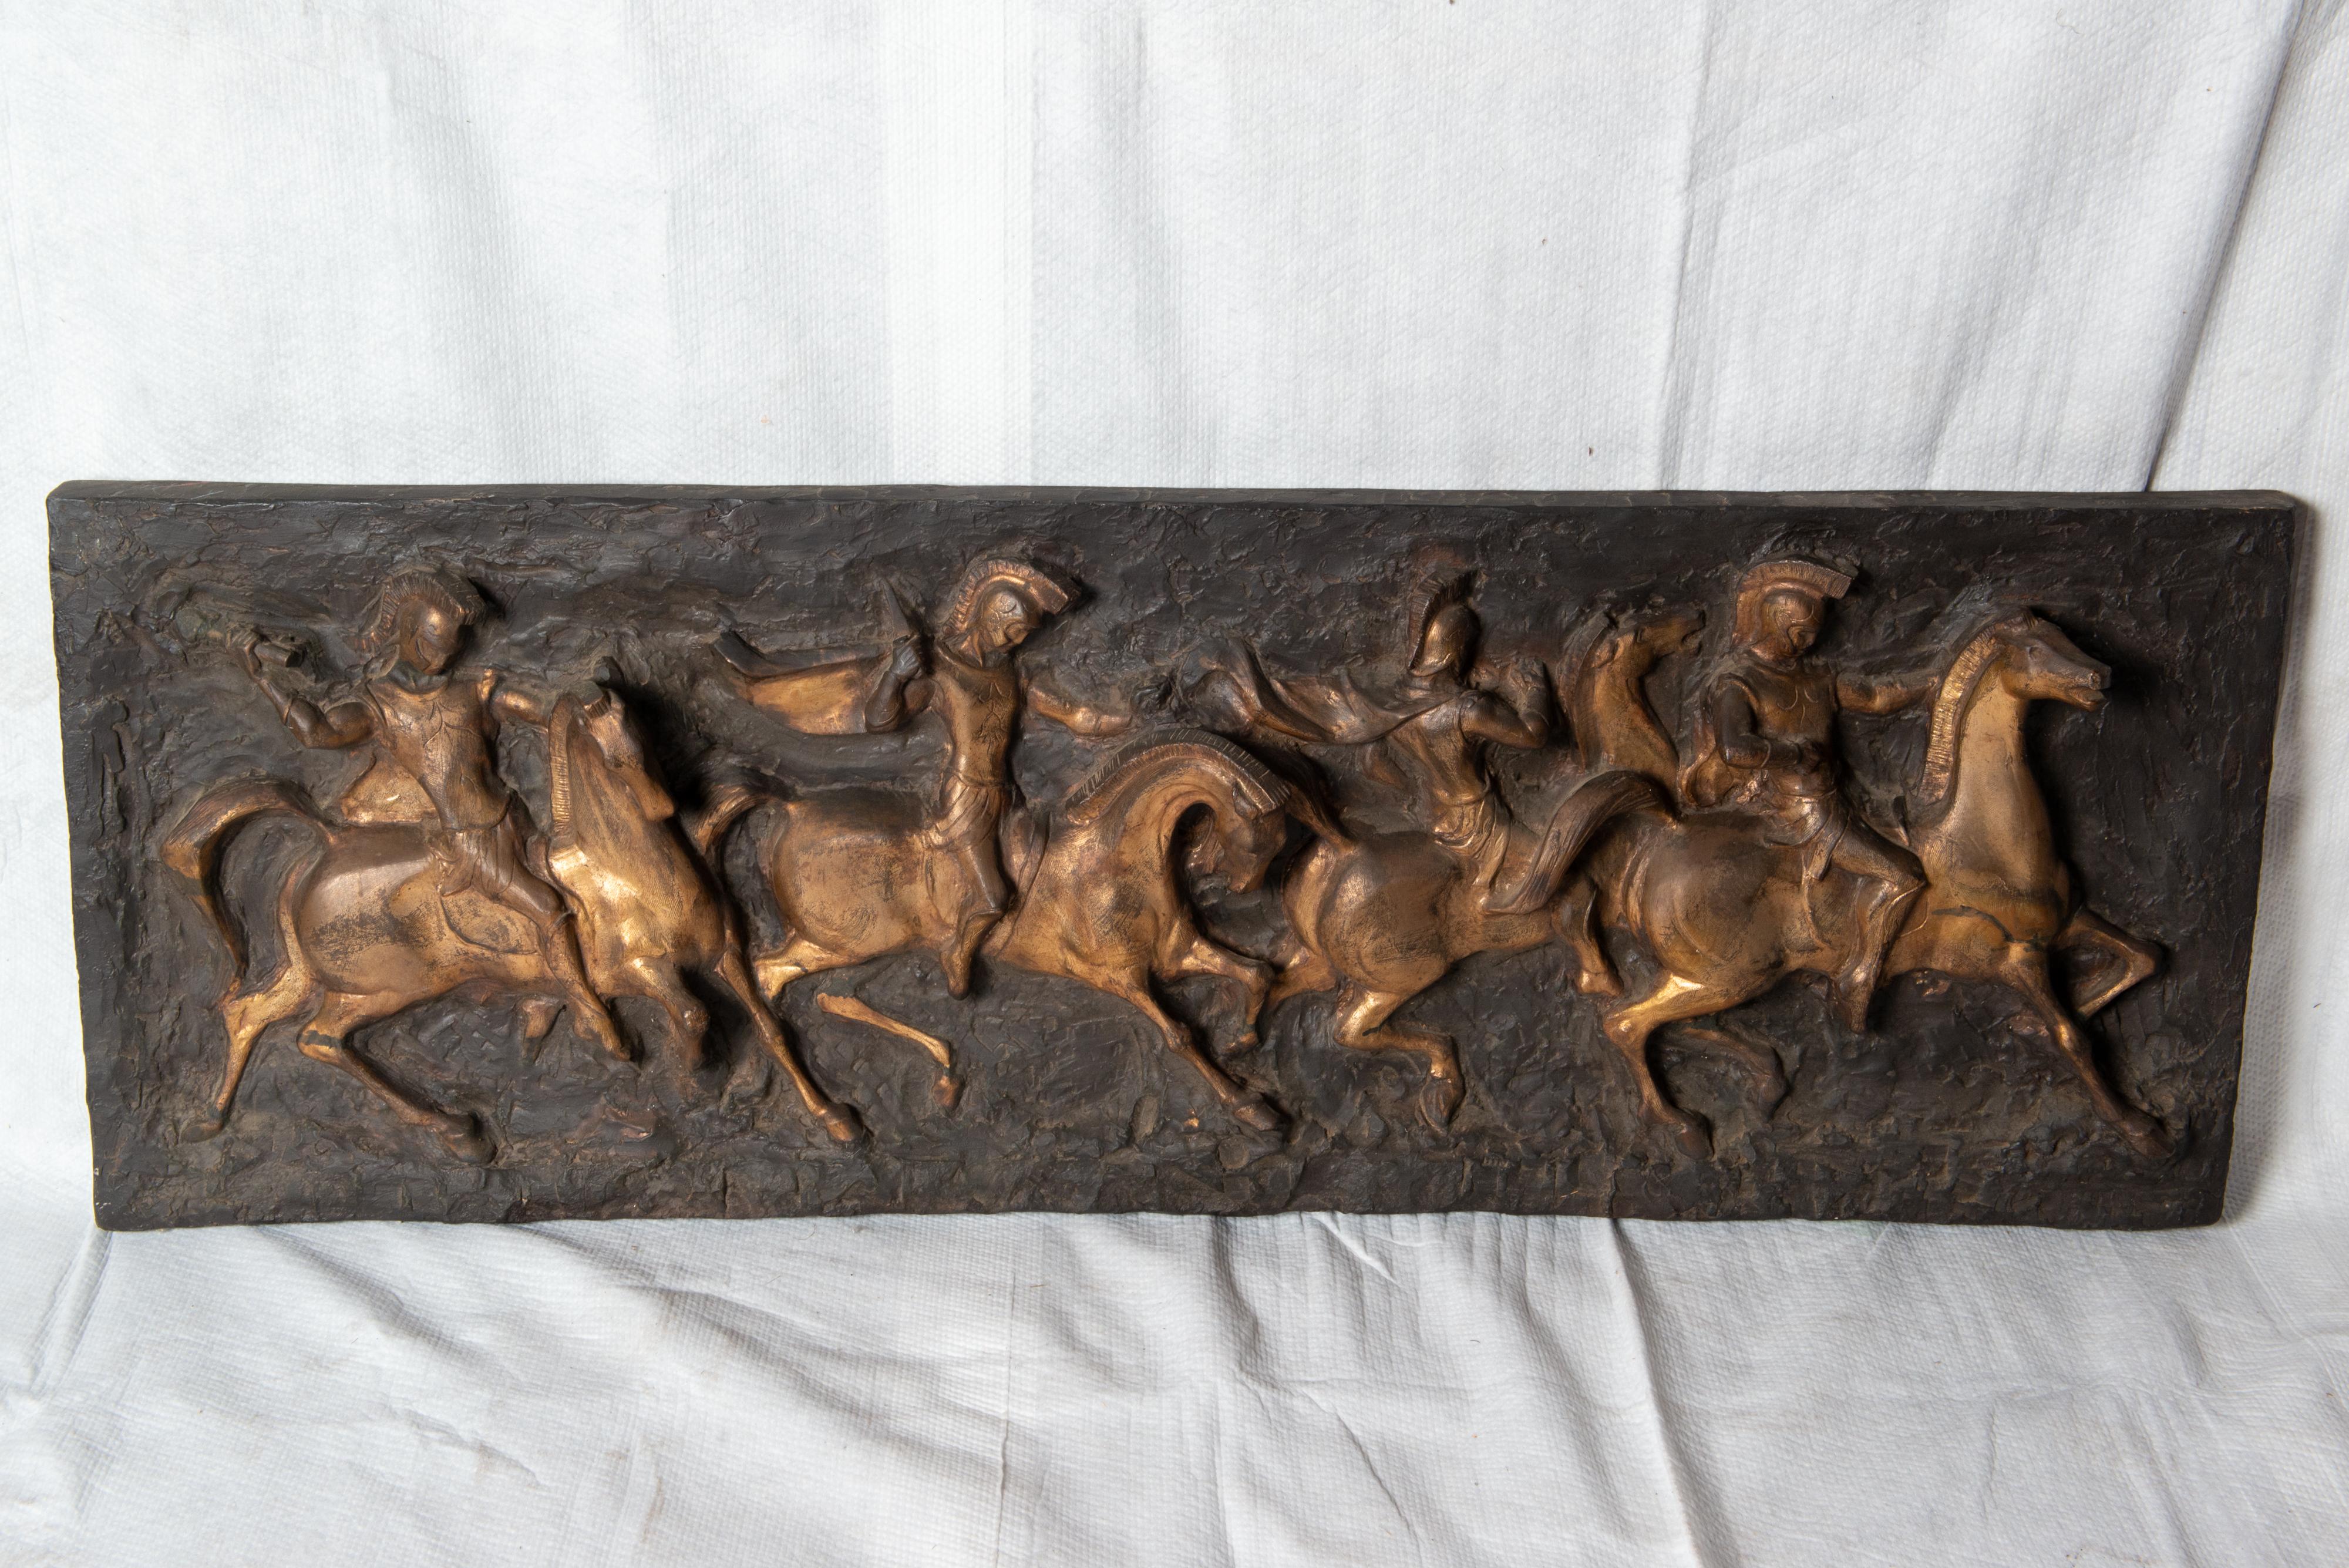 A great decorative Roman Warrior Frieze, with a black background and bronze colored soldiers on horseback in high relief. Made of fiberglass.
A statement piece.